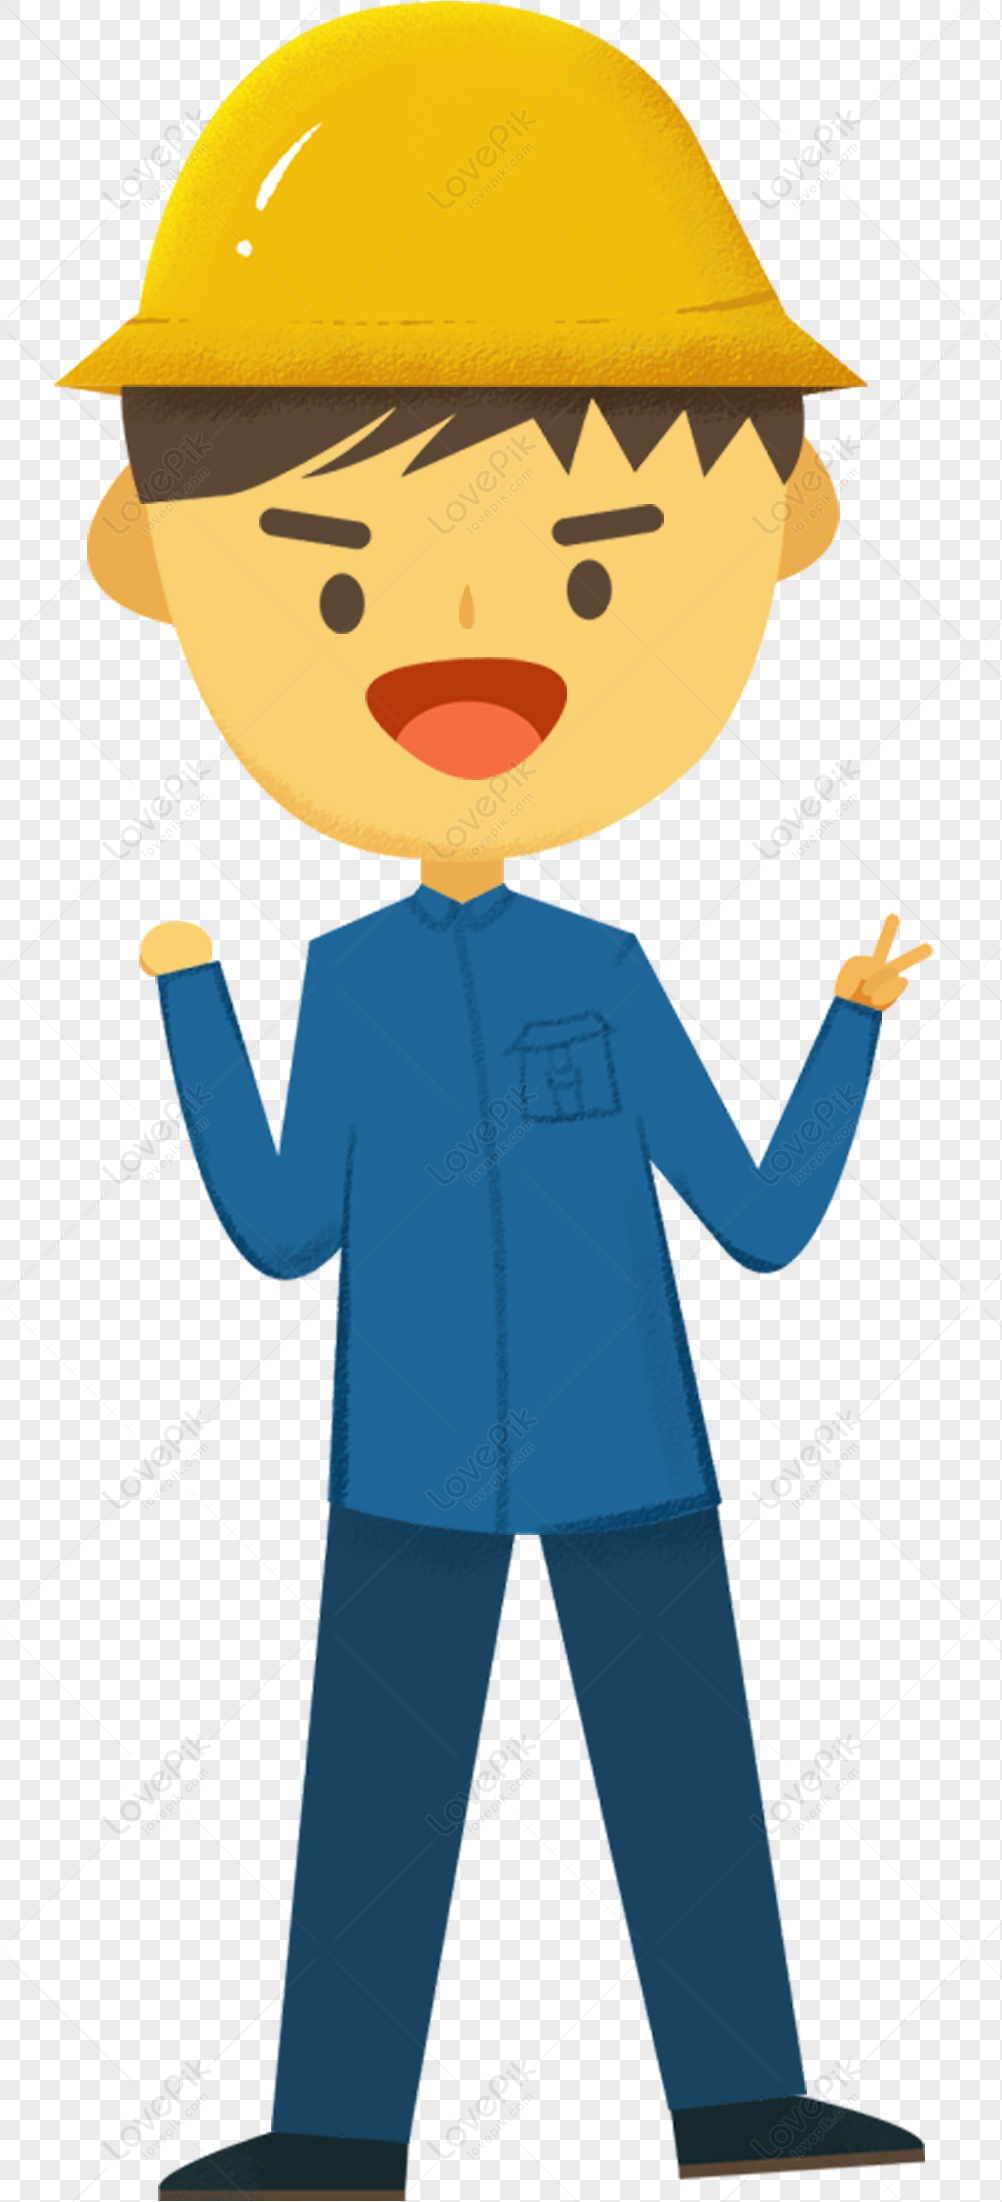 Workers Wear Safety Helmets PNG Picture And Clipart Image For Free Download  - Lovepik | 400357005